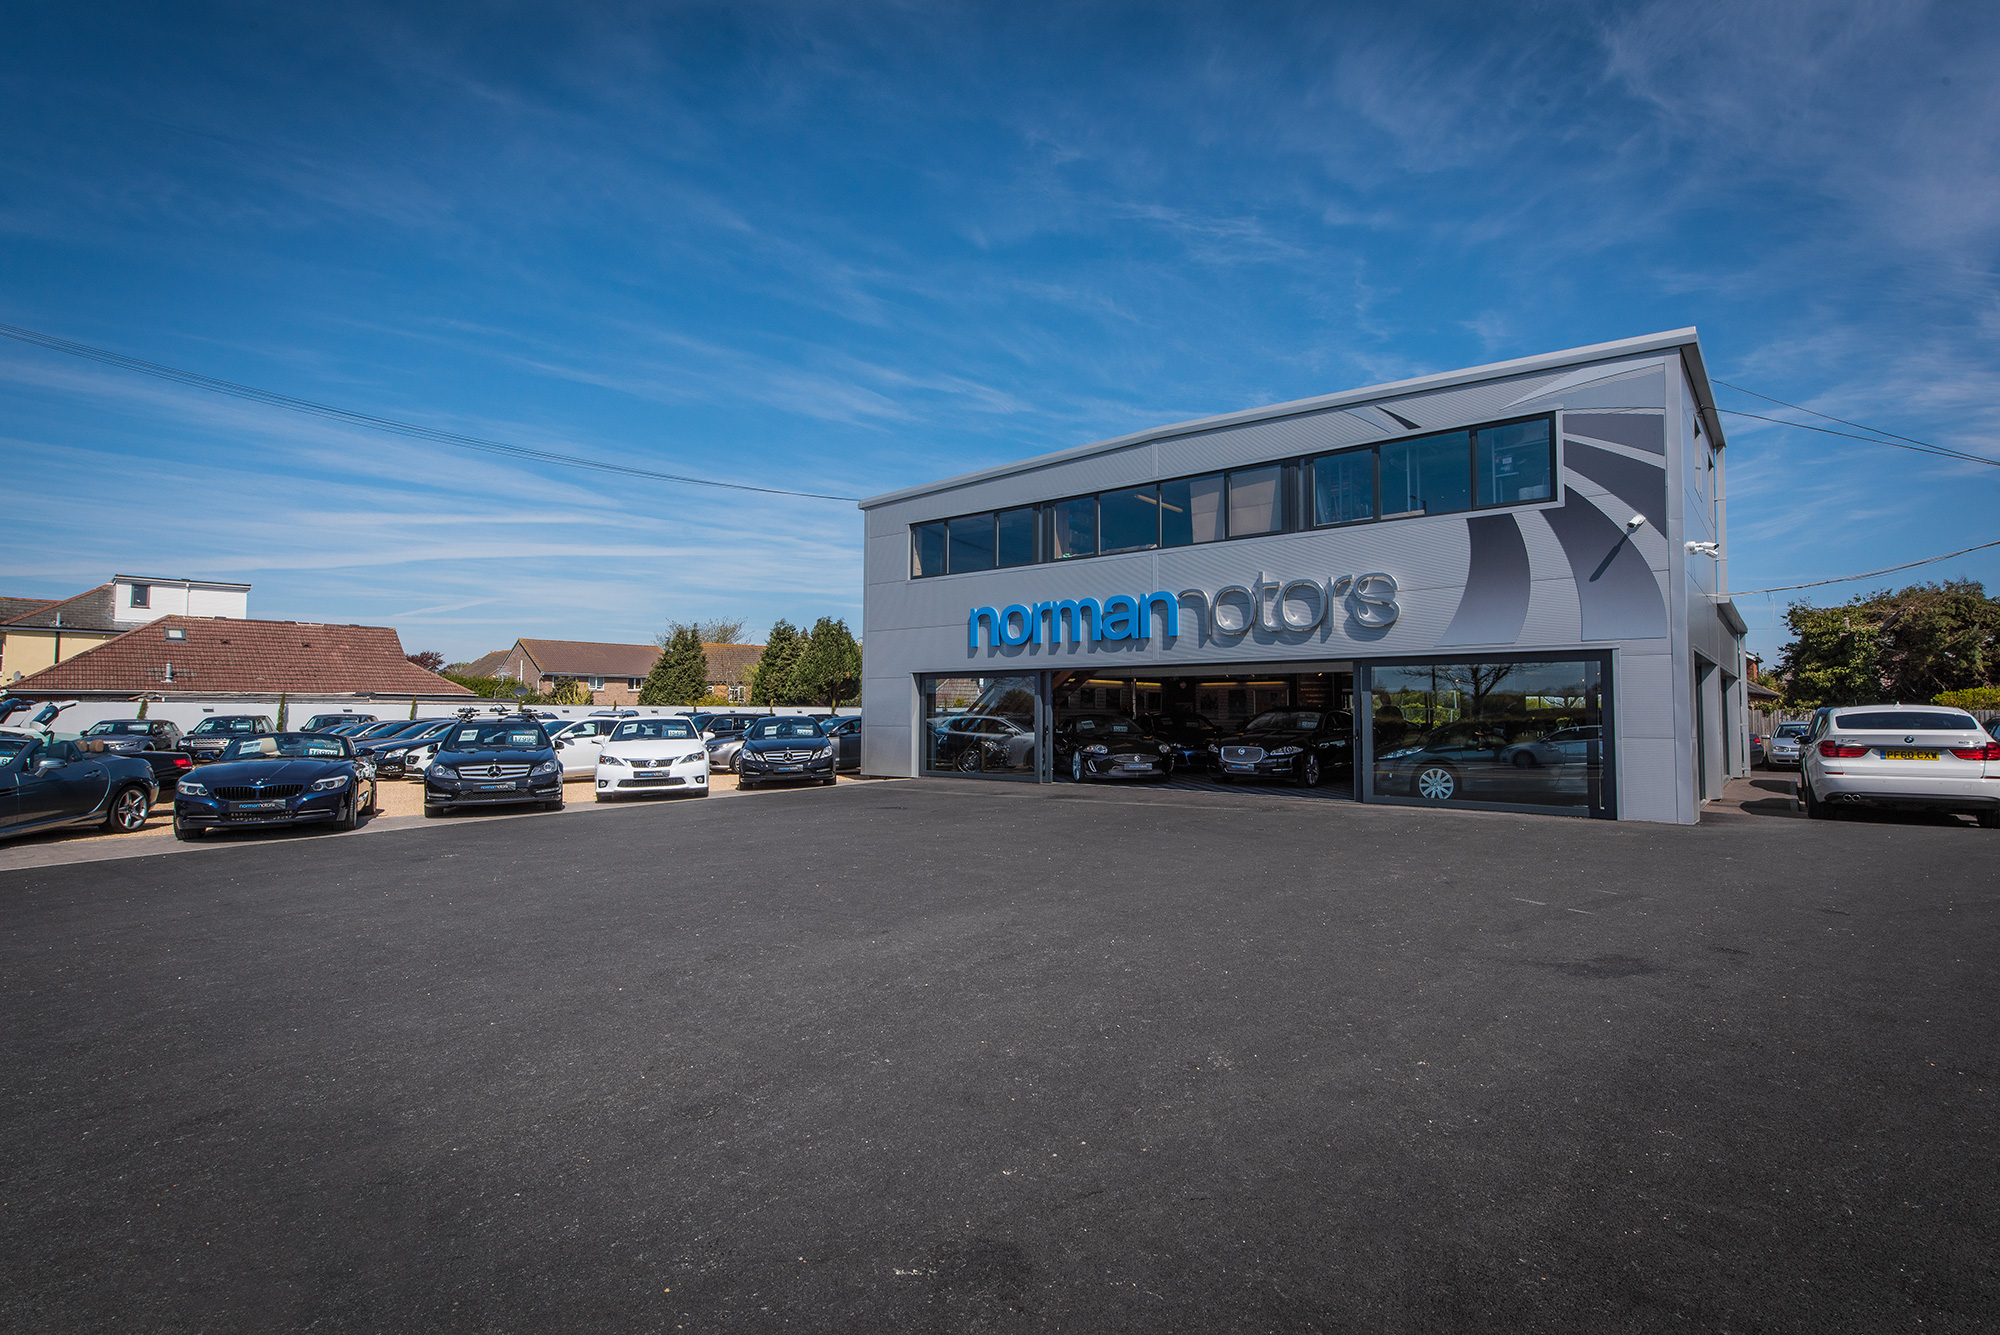 Norman-Motors-Commerical-Photography-Bournemouth-Car-Garage-3.jpg